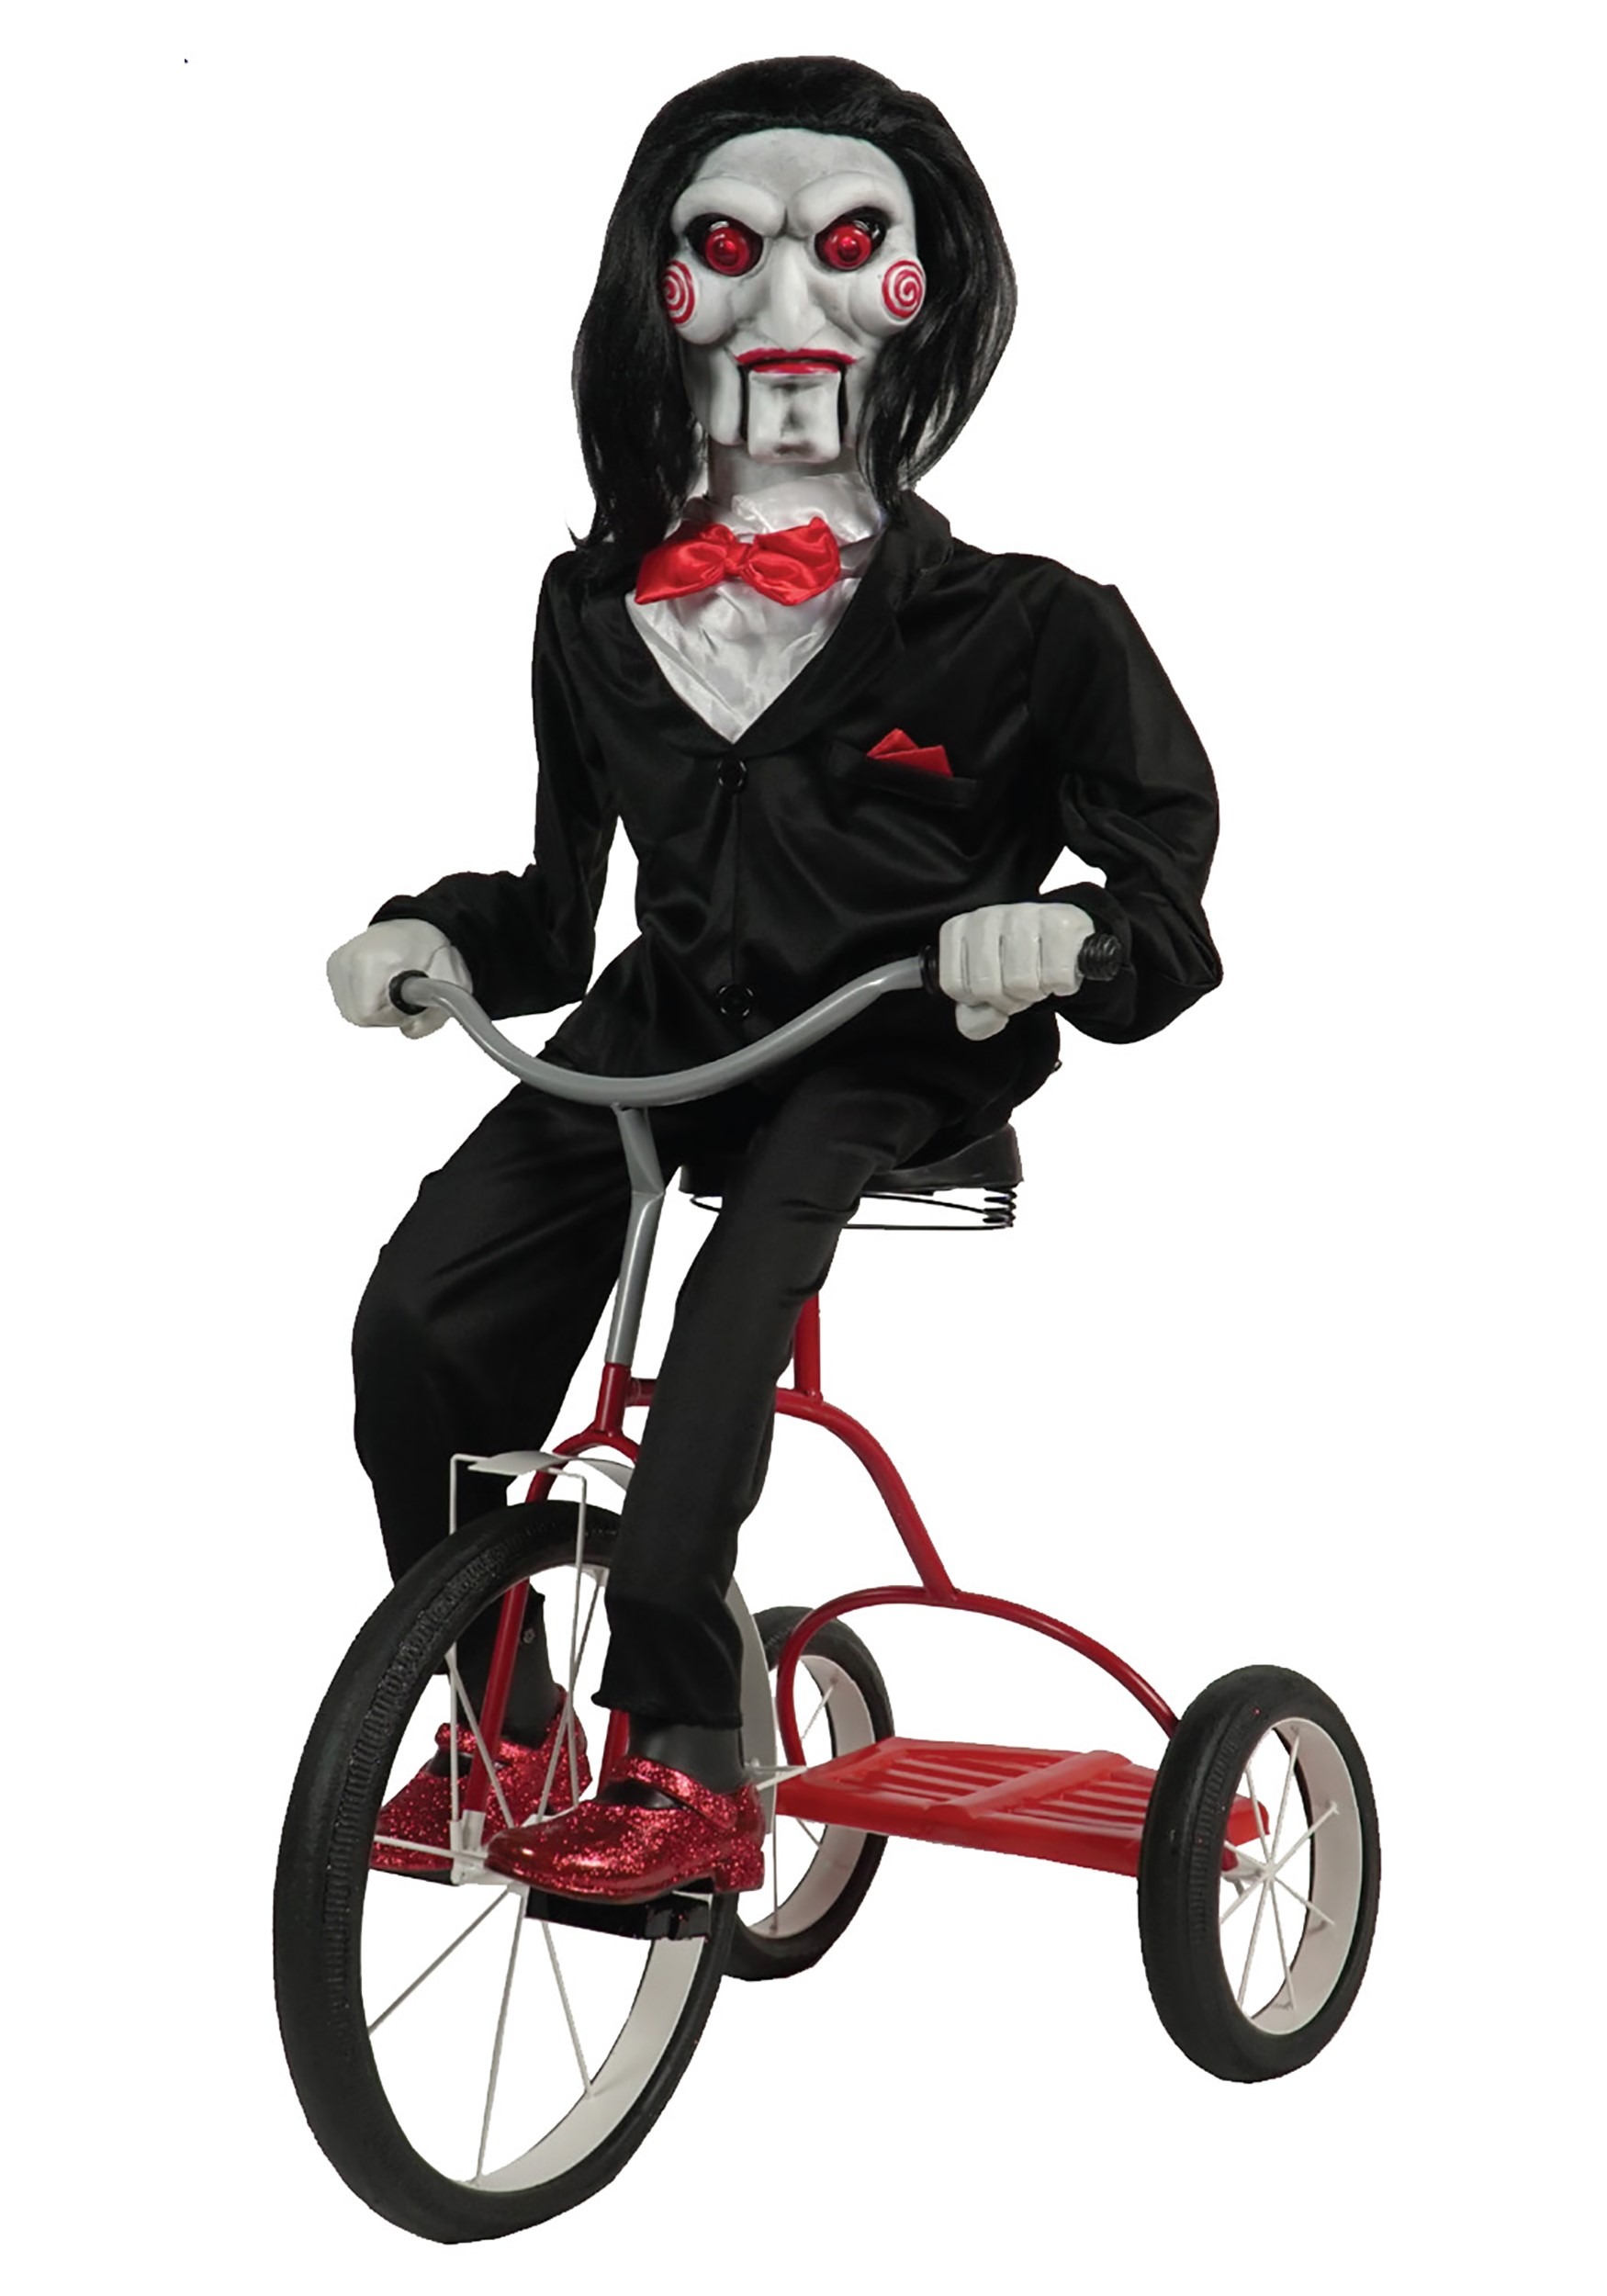 Men Saw Billy Costume Fancy Dress Halloween Horror Adult Tricycle Puppet Outfit